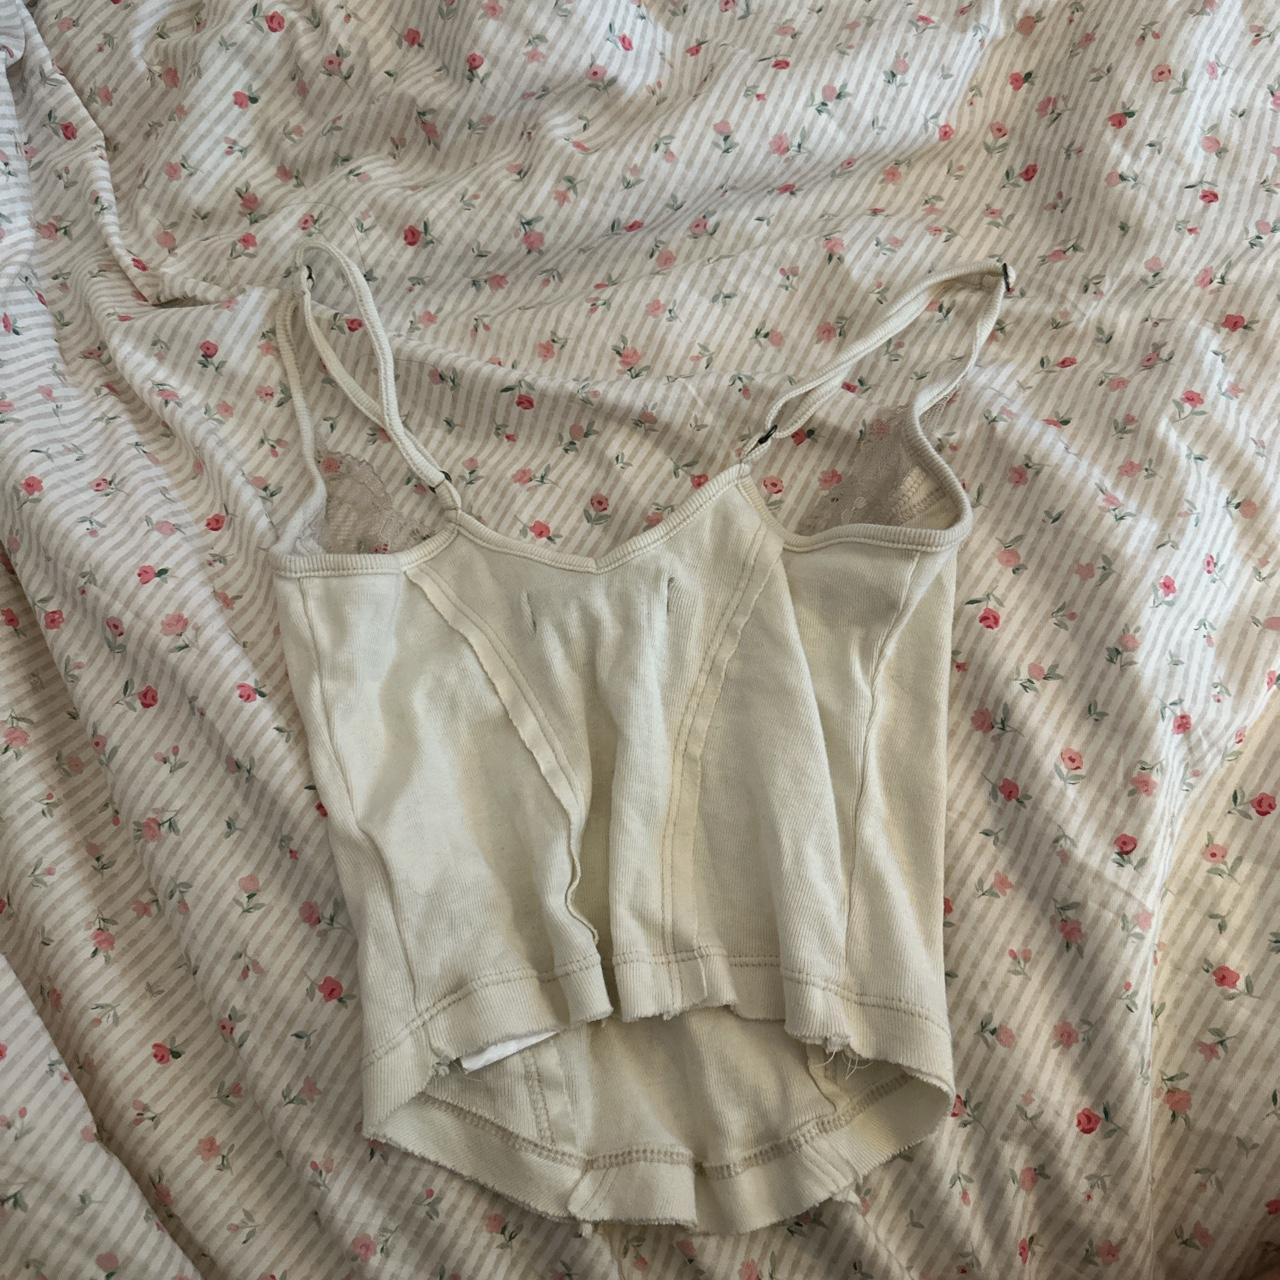 Urban Outfitters Women's Cream and White Vest (3)